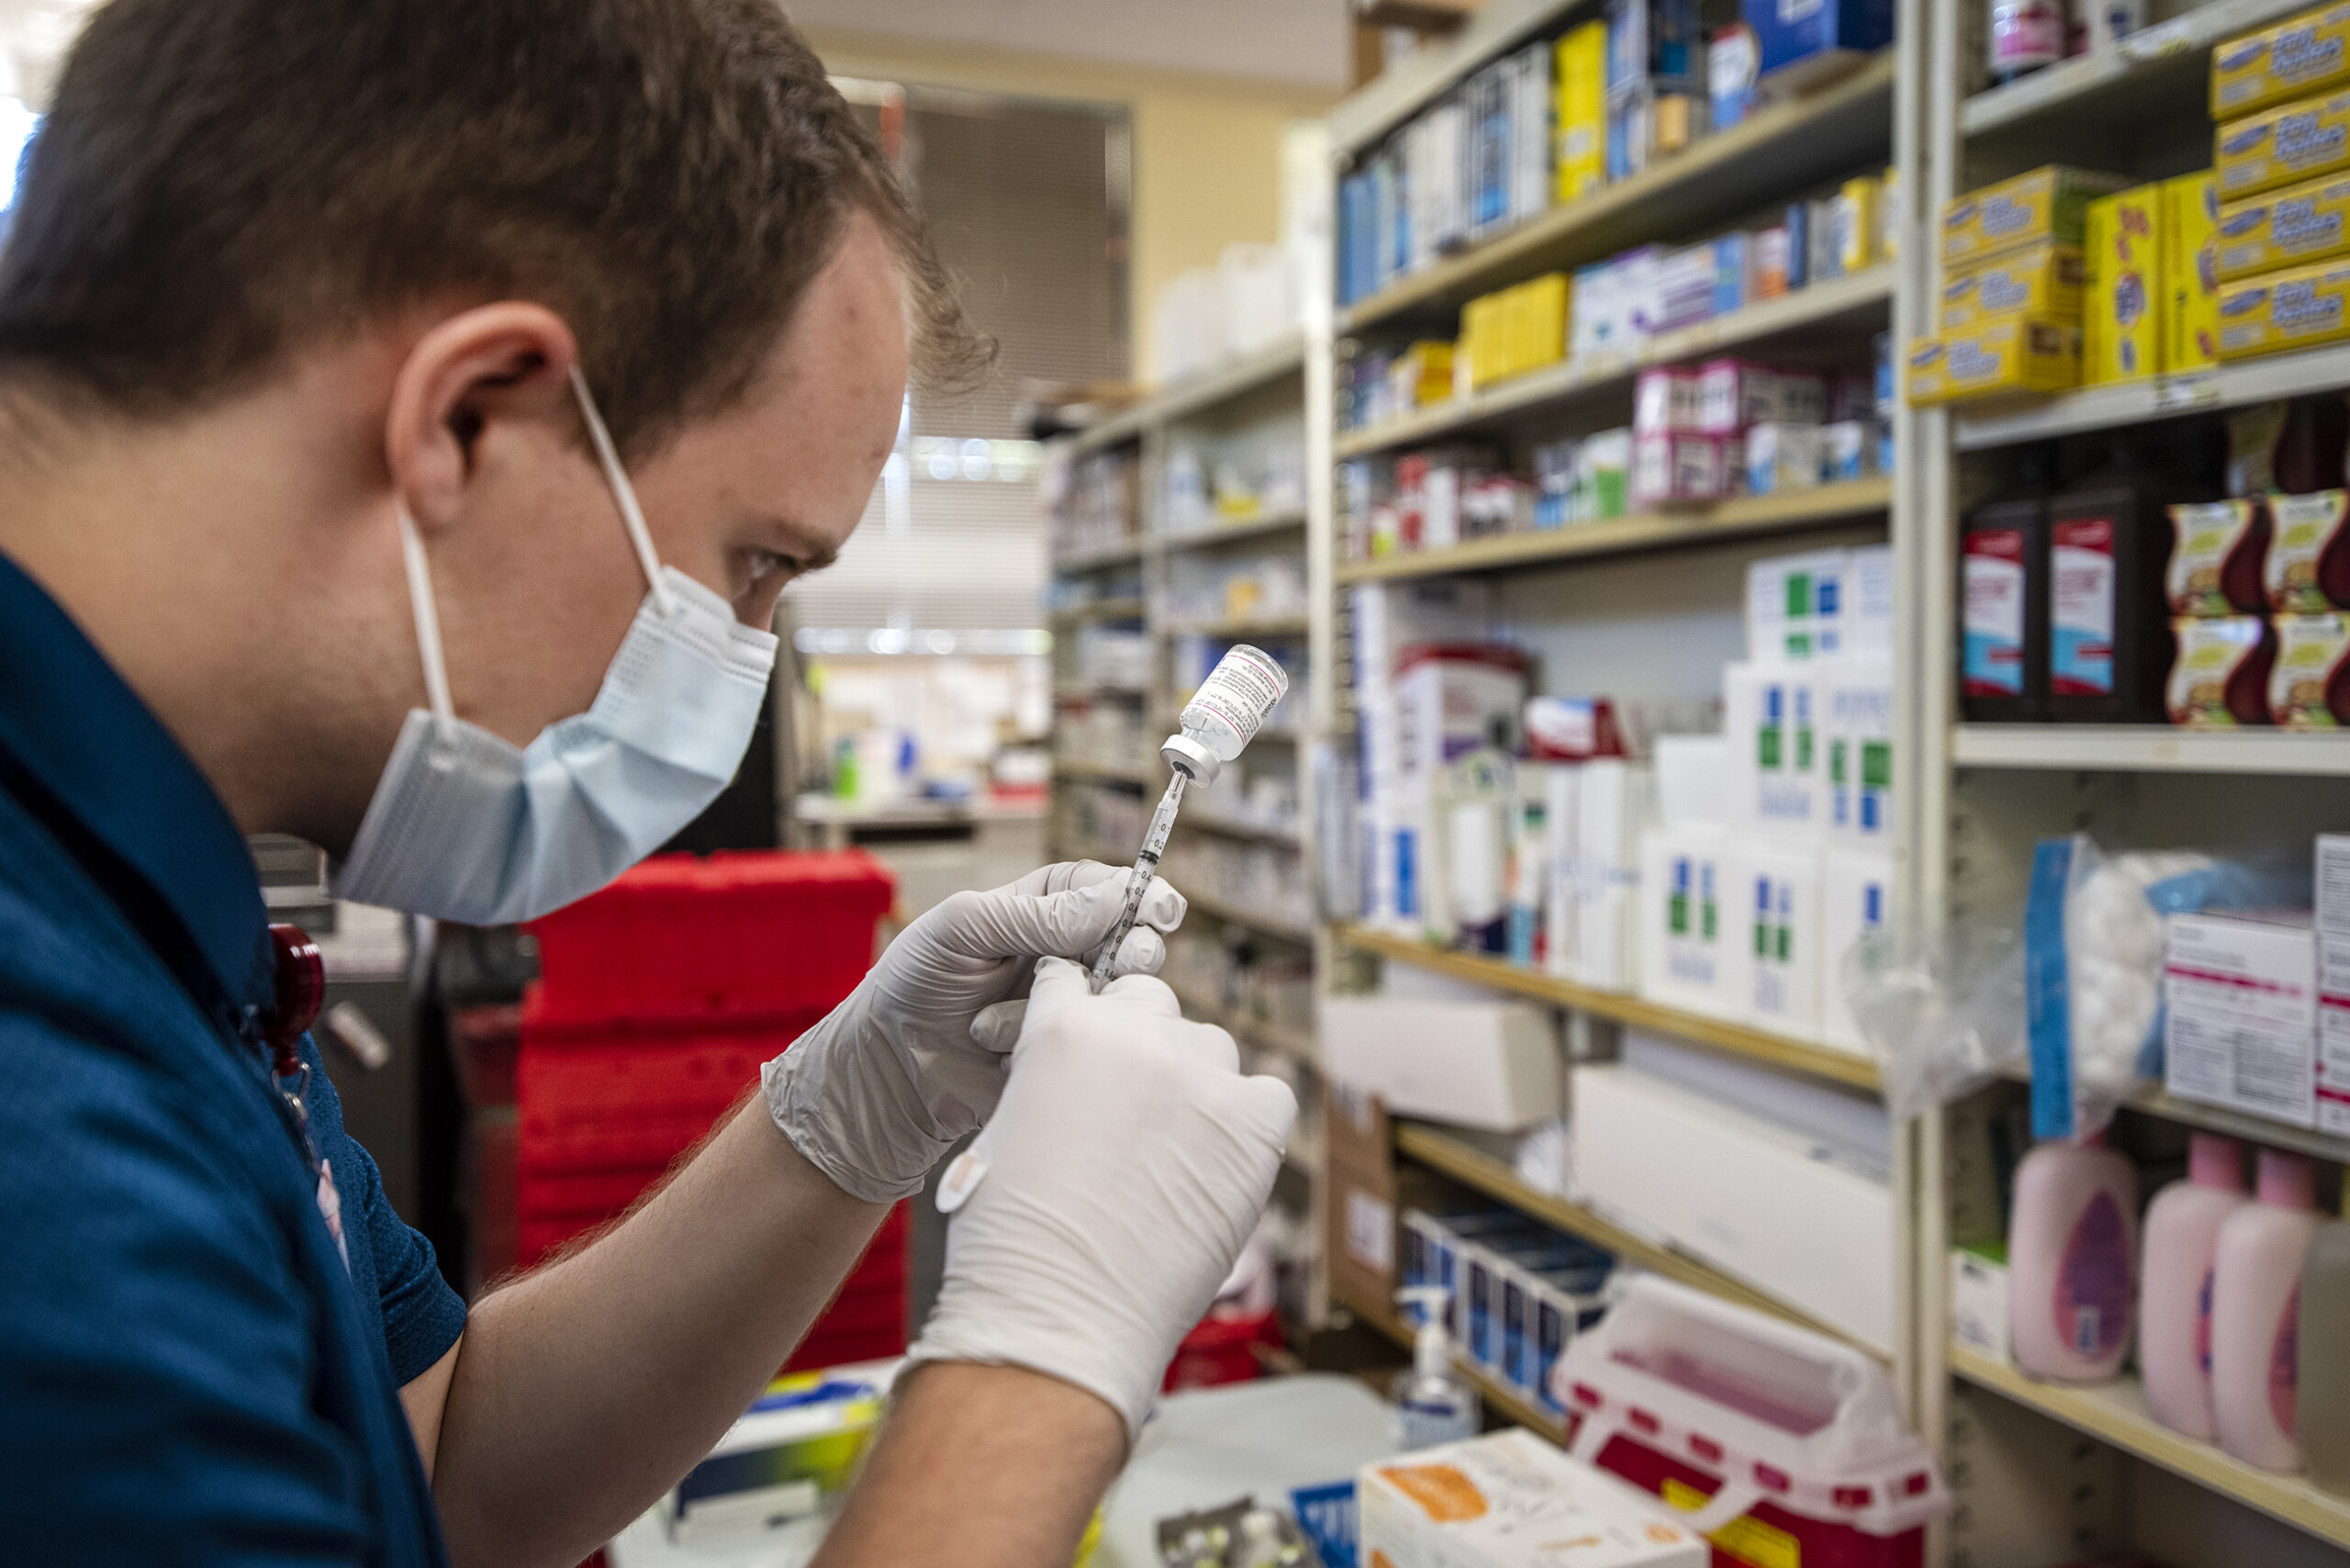 UW-Madison launches new initiative to train more pharmacists from around Wisconsin